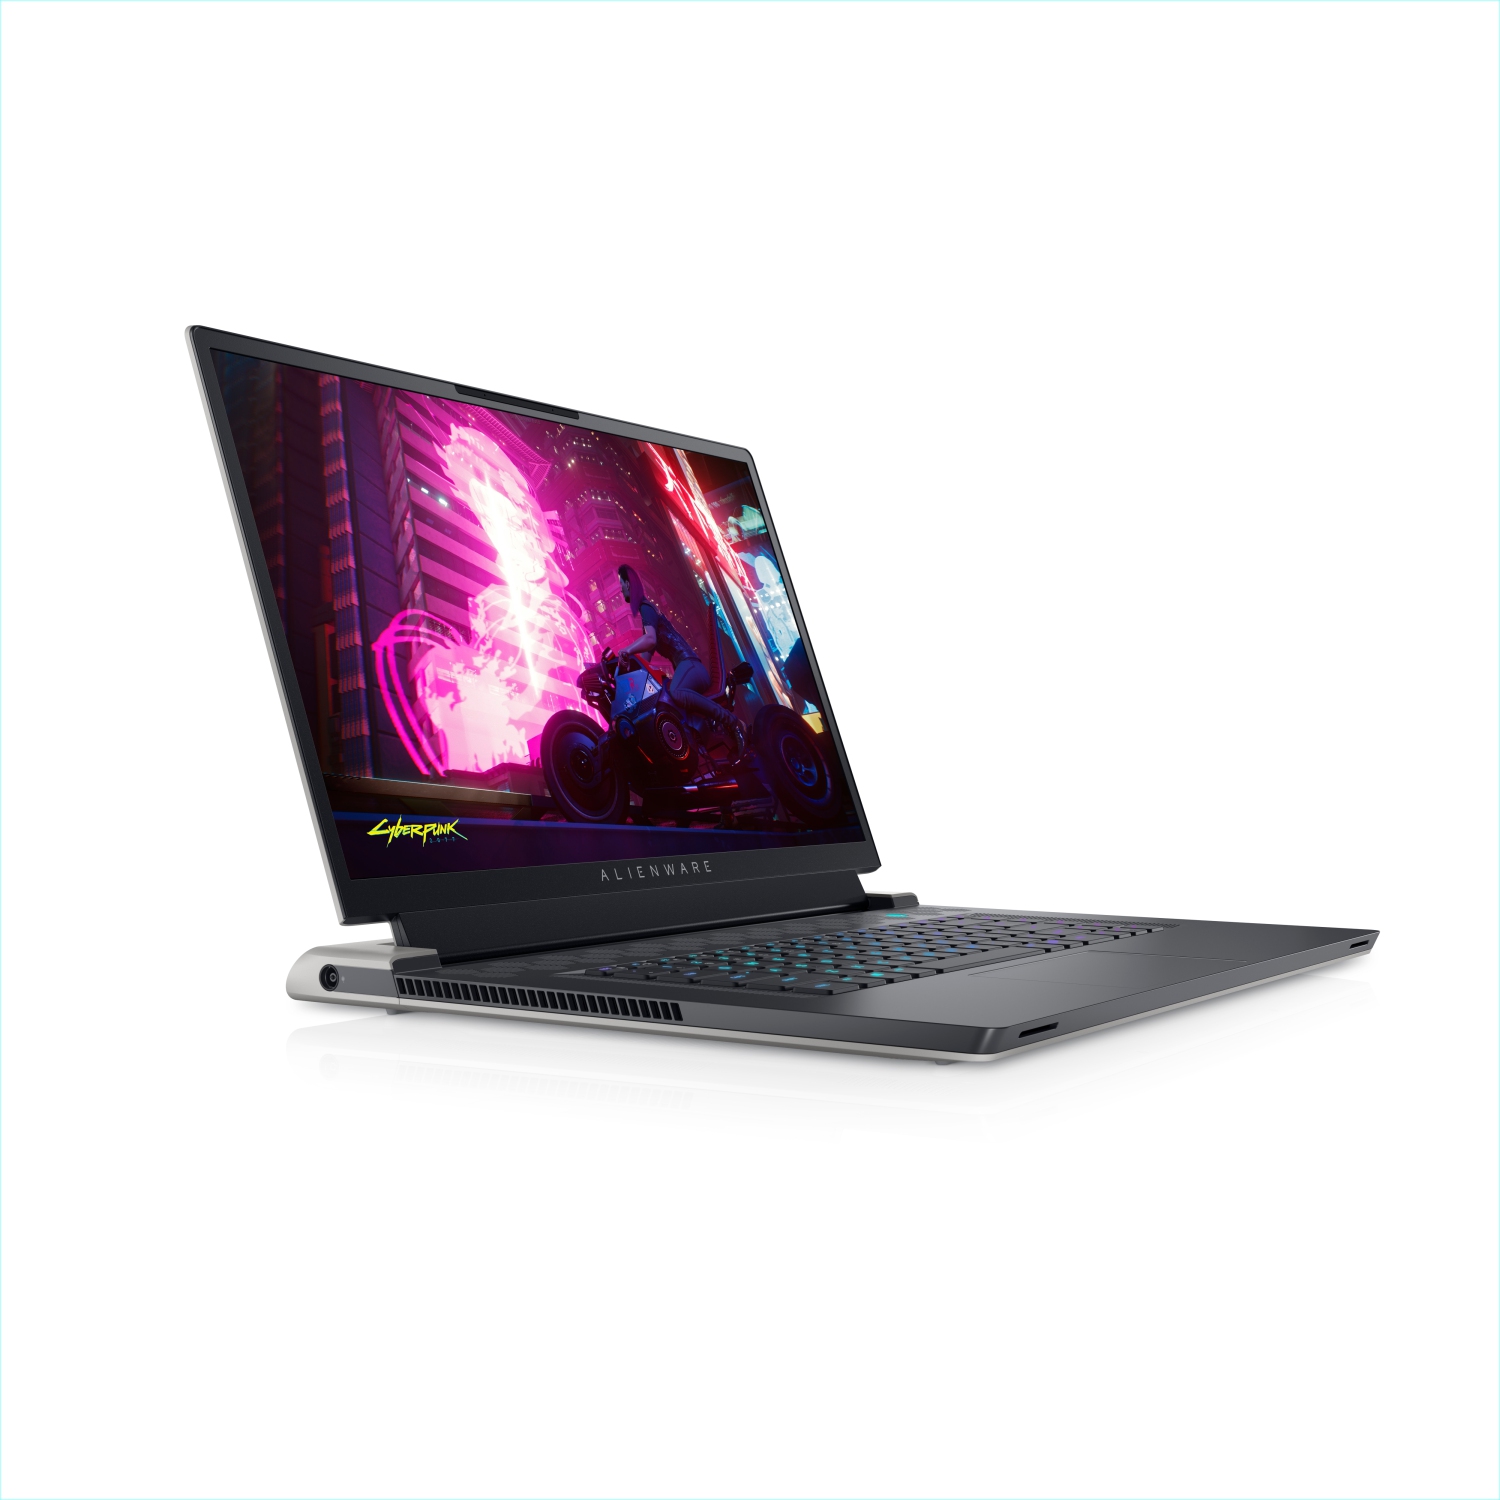 Refurbished (Excellent) - Dell Alienware X17 R1 Gaming Laptop (2021), 17.3" 4K, Core i9, 1TB SSD + 1TB SSD, 16GB RAM, RTX 3080, 8 Cores @ 5 GHz, 11th Gen CPU Certified